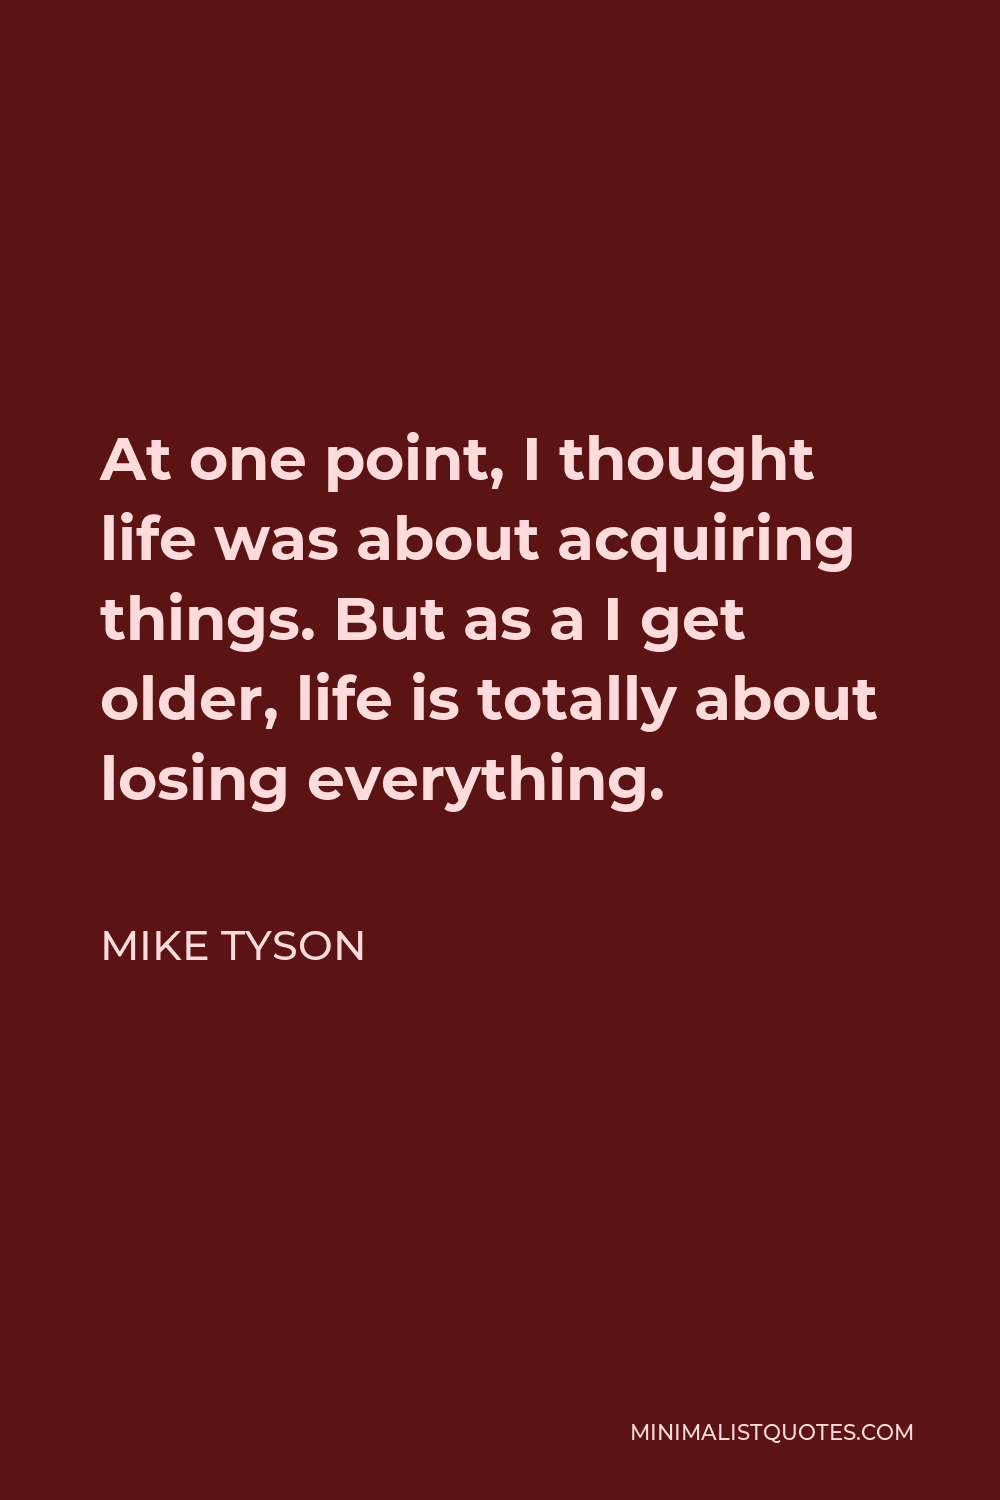 Mike Tyson Quote - At one point, I thought life was about acquiring things. But as a I get older, life is totally about losing everything.